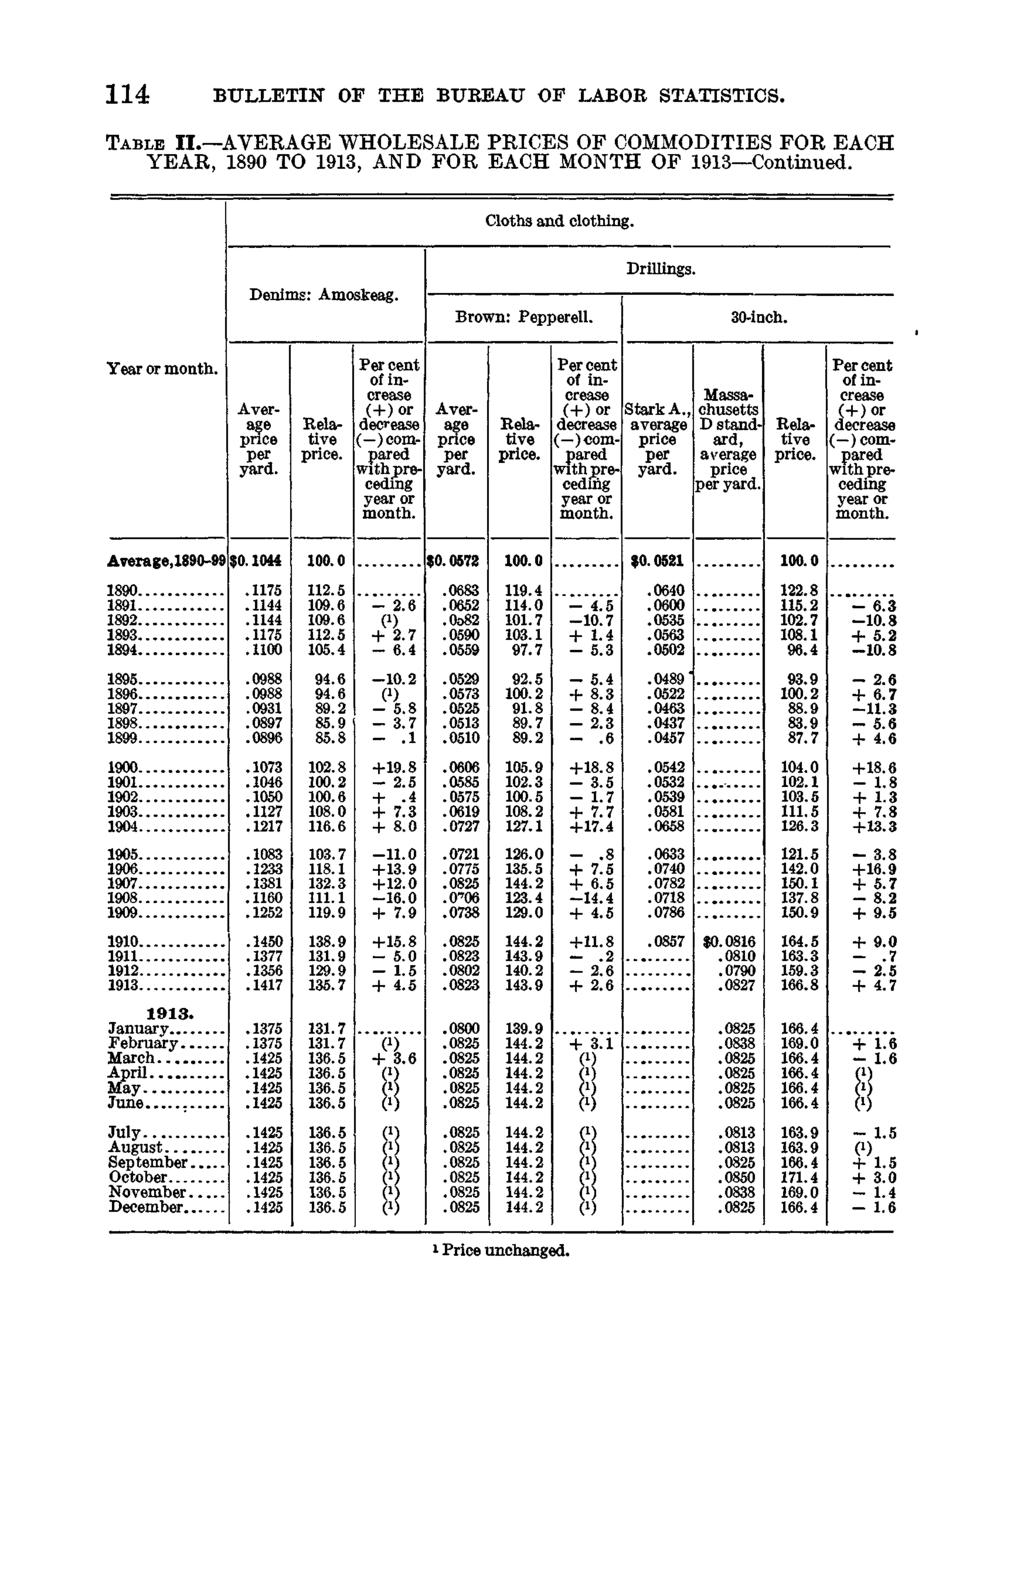 1 1 4 BULLETIN OF THE BUREAU OF LABOR STATISTICS. T a b l e II. AVERAGE WHOLESALE PRICES OF COMMODITIES FOR EACH YEAR, 1890 TO 1913, AND FOR EACH MONTH OF 1913 Continued. Cloths and clothing.